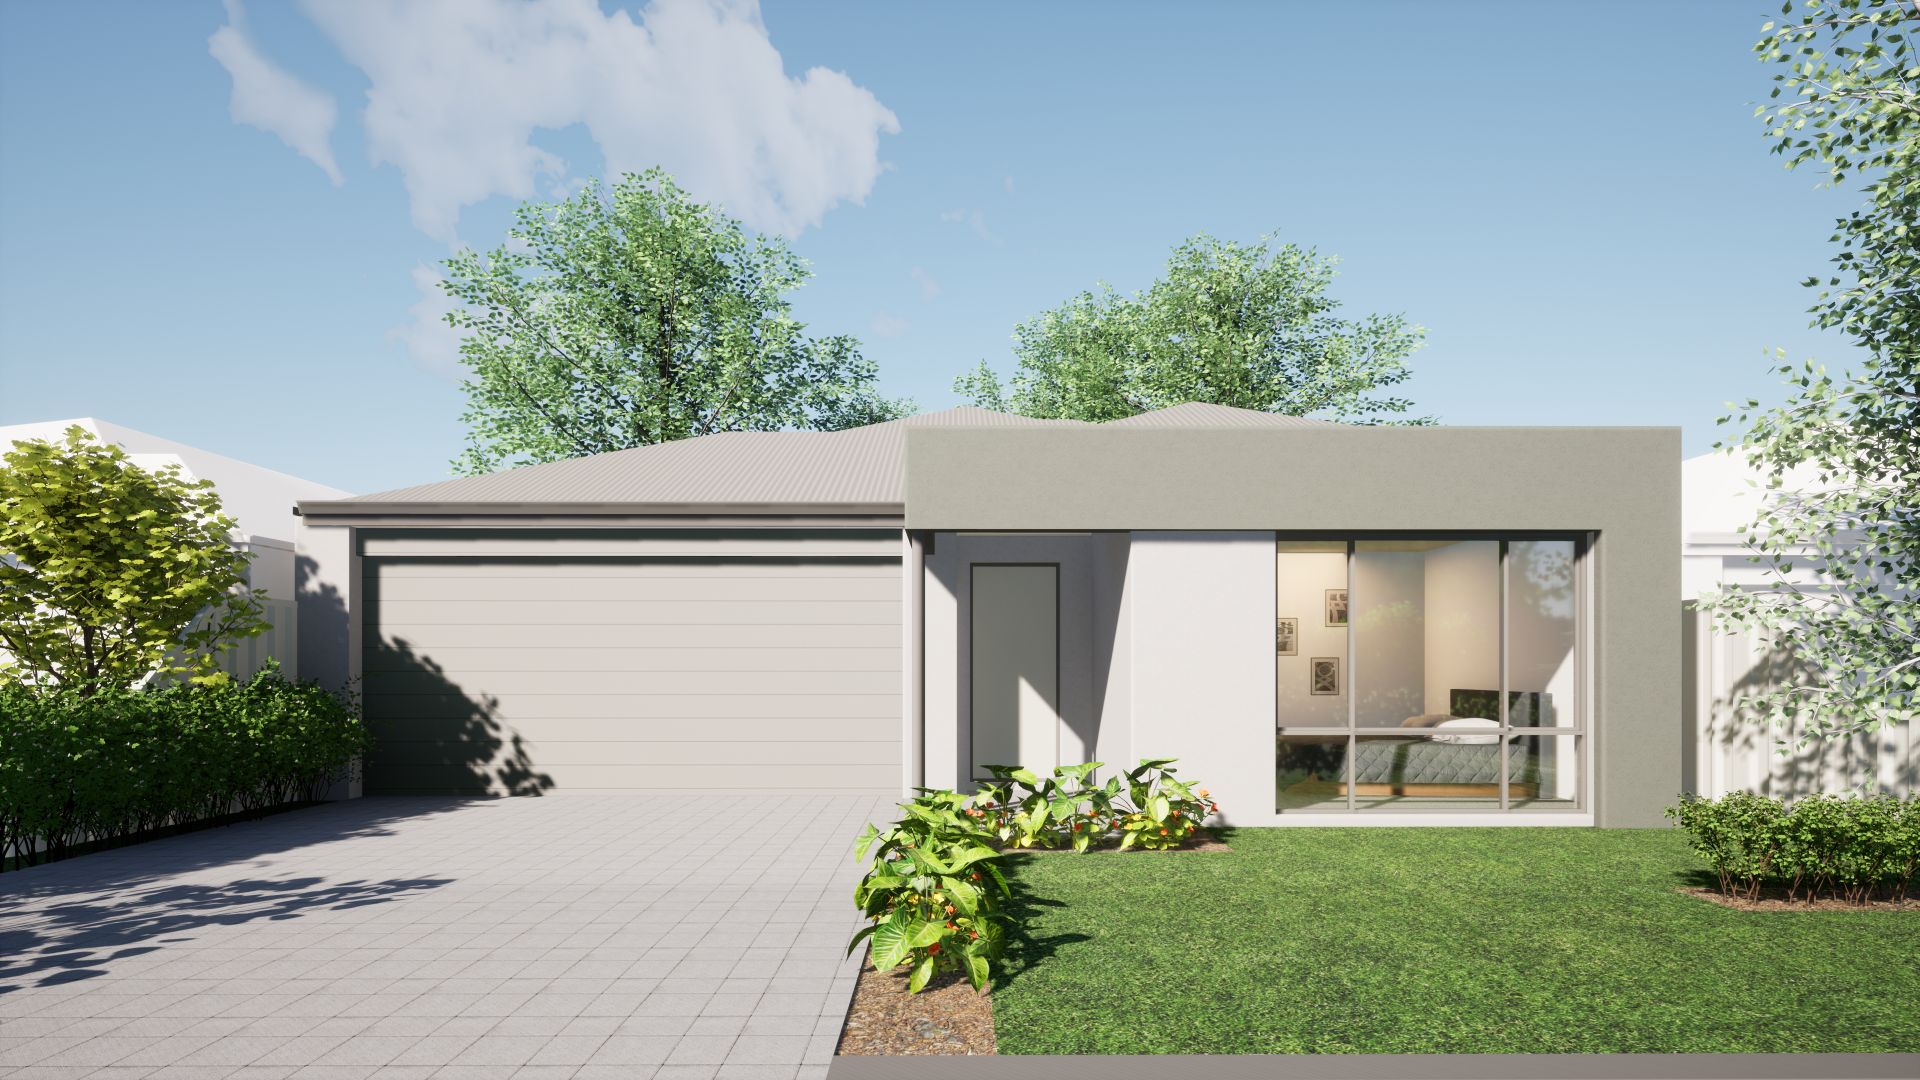 4 bedrooms New House & Land in Lot 112 Scenograph Drive SINAGRA WA, 6065